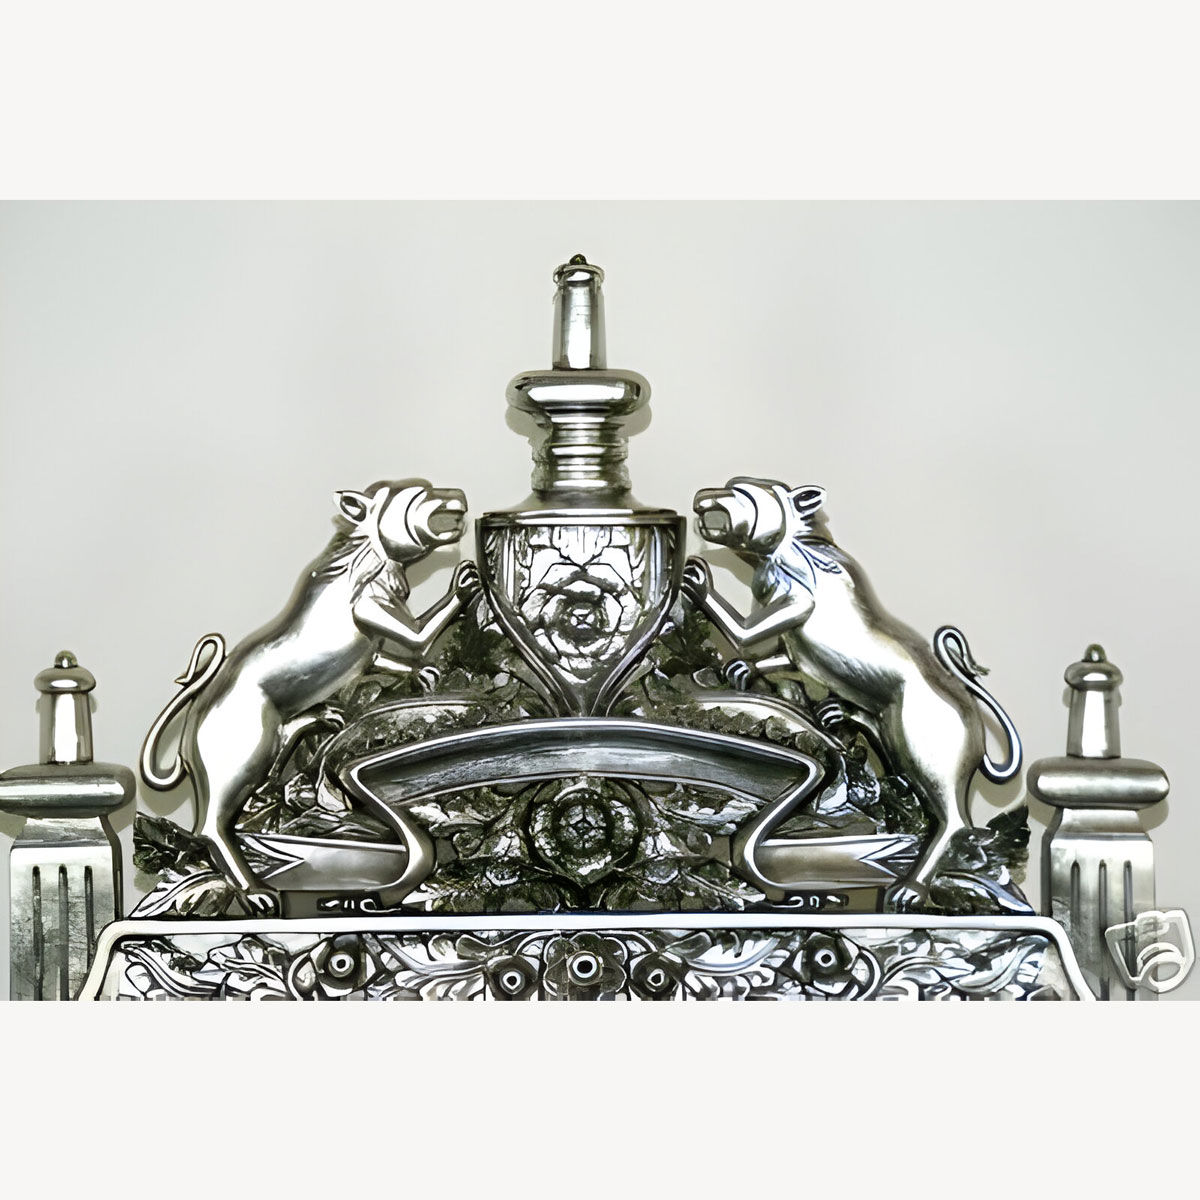 Tudor Royal Throne Chair In Silver And Black 5 - Hampshire Barn Interiors - Tudor Royal Throne Chair In Silver And Black -